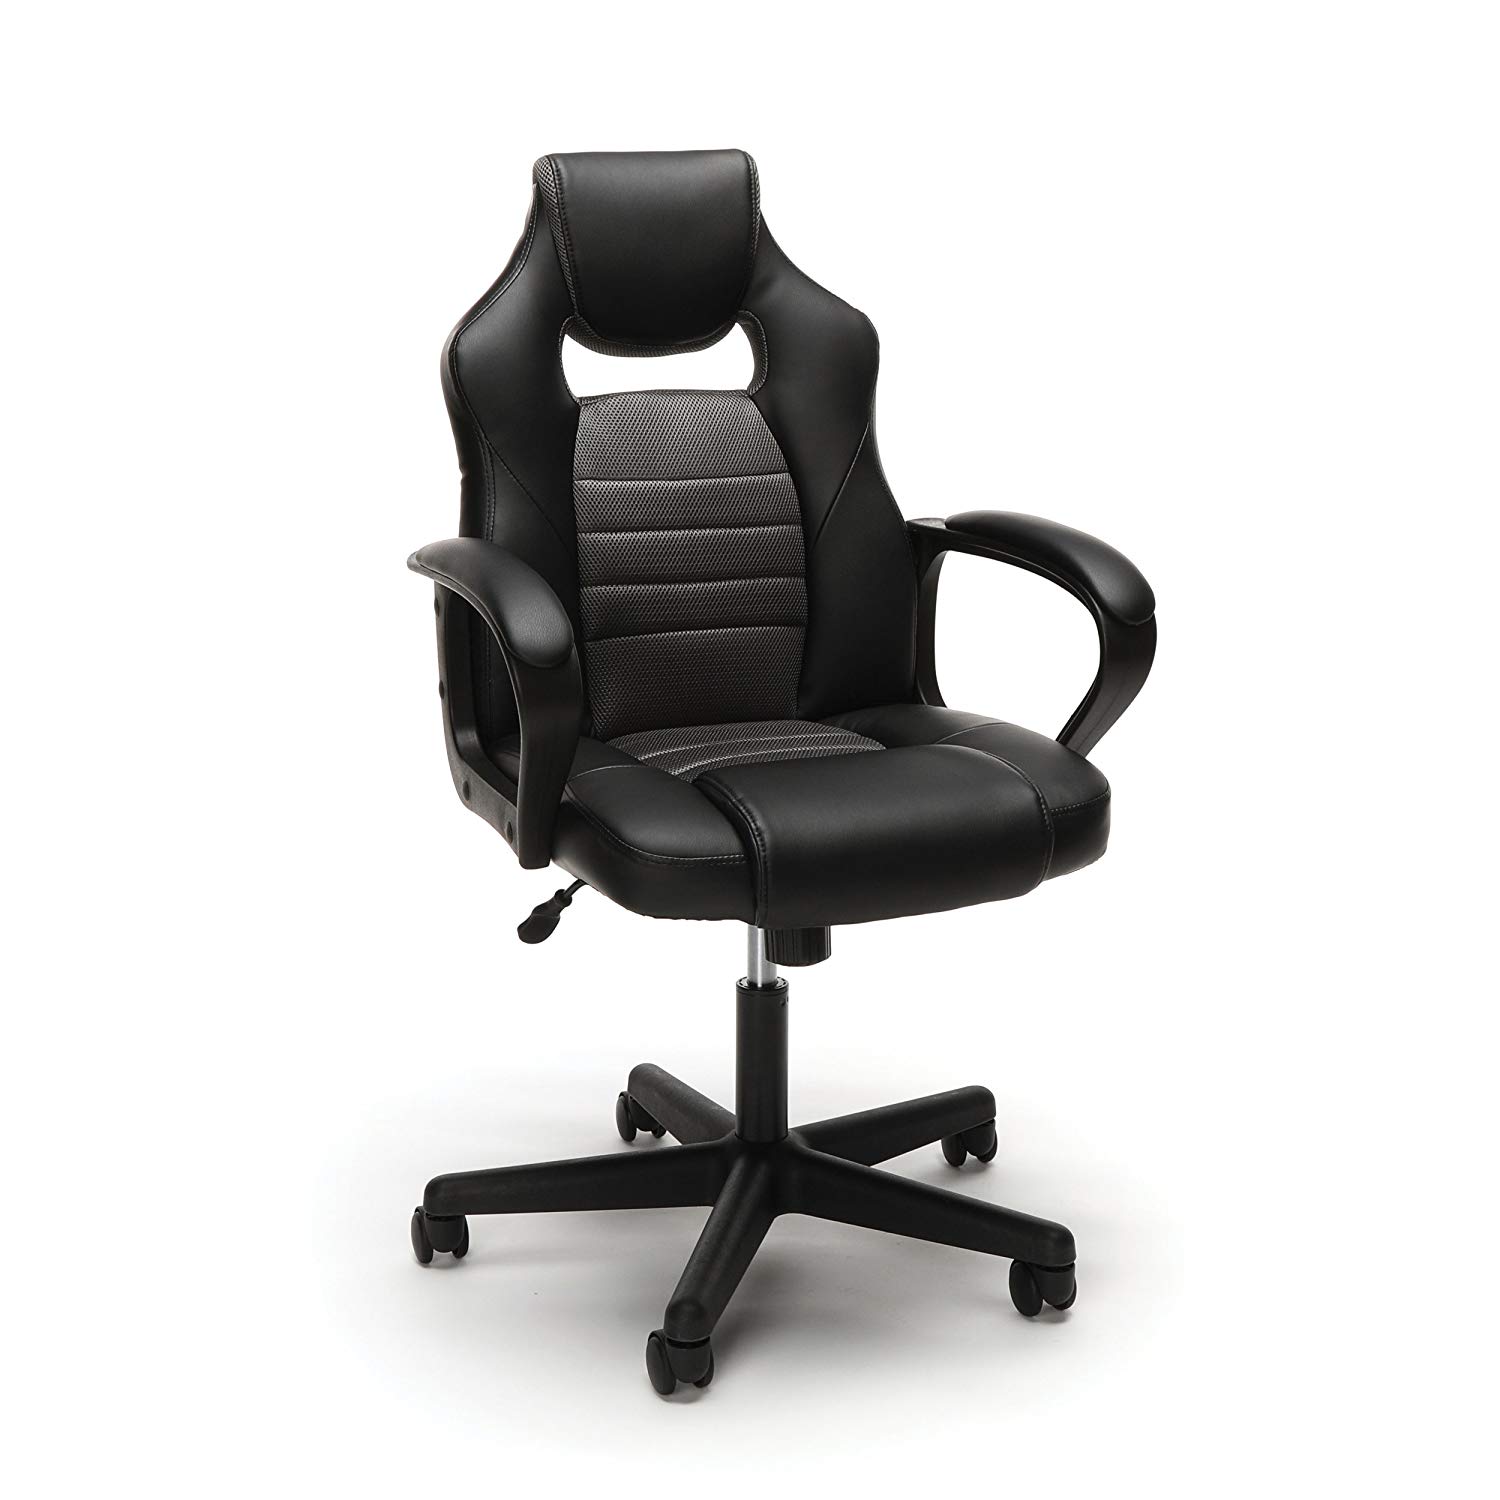 Essentials Gaming Chair - Racing Style Ergonomic Mesh and Leather Computer Chair, Gray (ESS-3083-GRY)